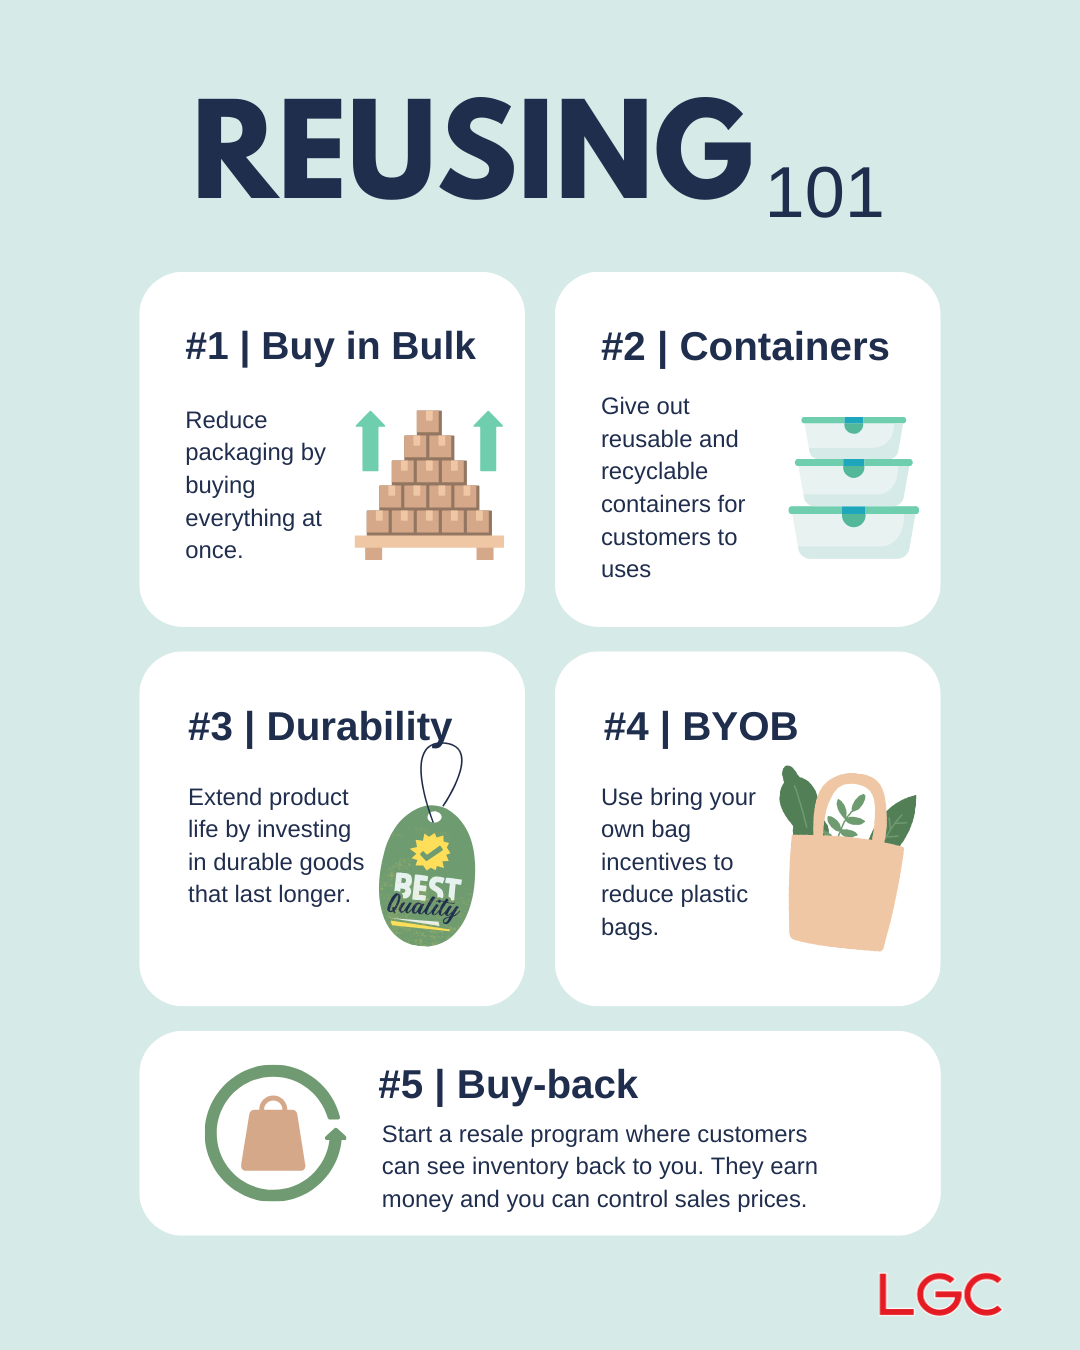 An infographic of different strategies for implementing reuse strategies in businesses.